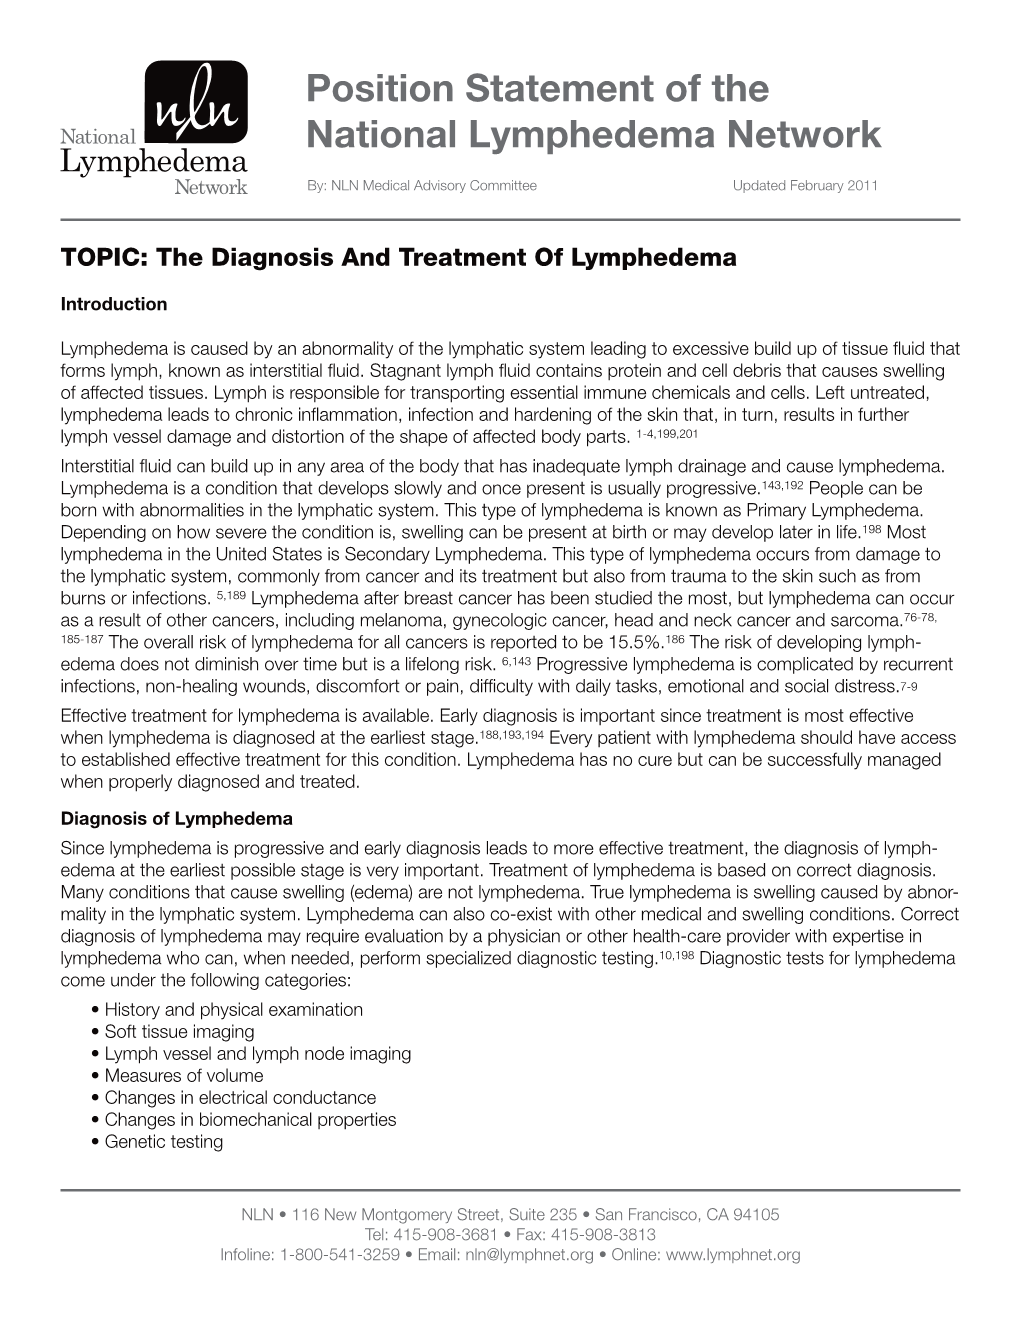 Position Statement of the National Lymphedema Network